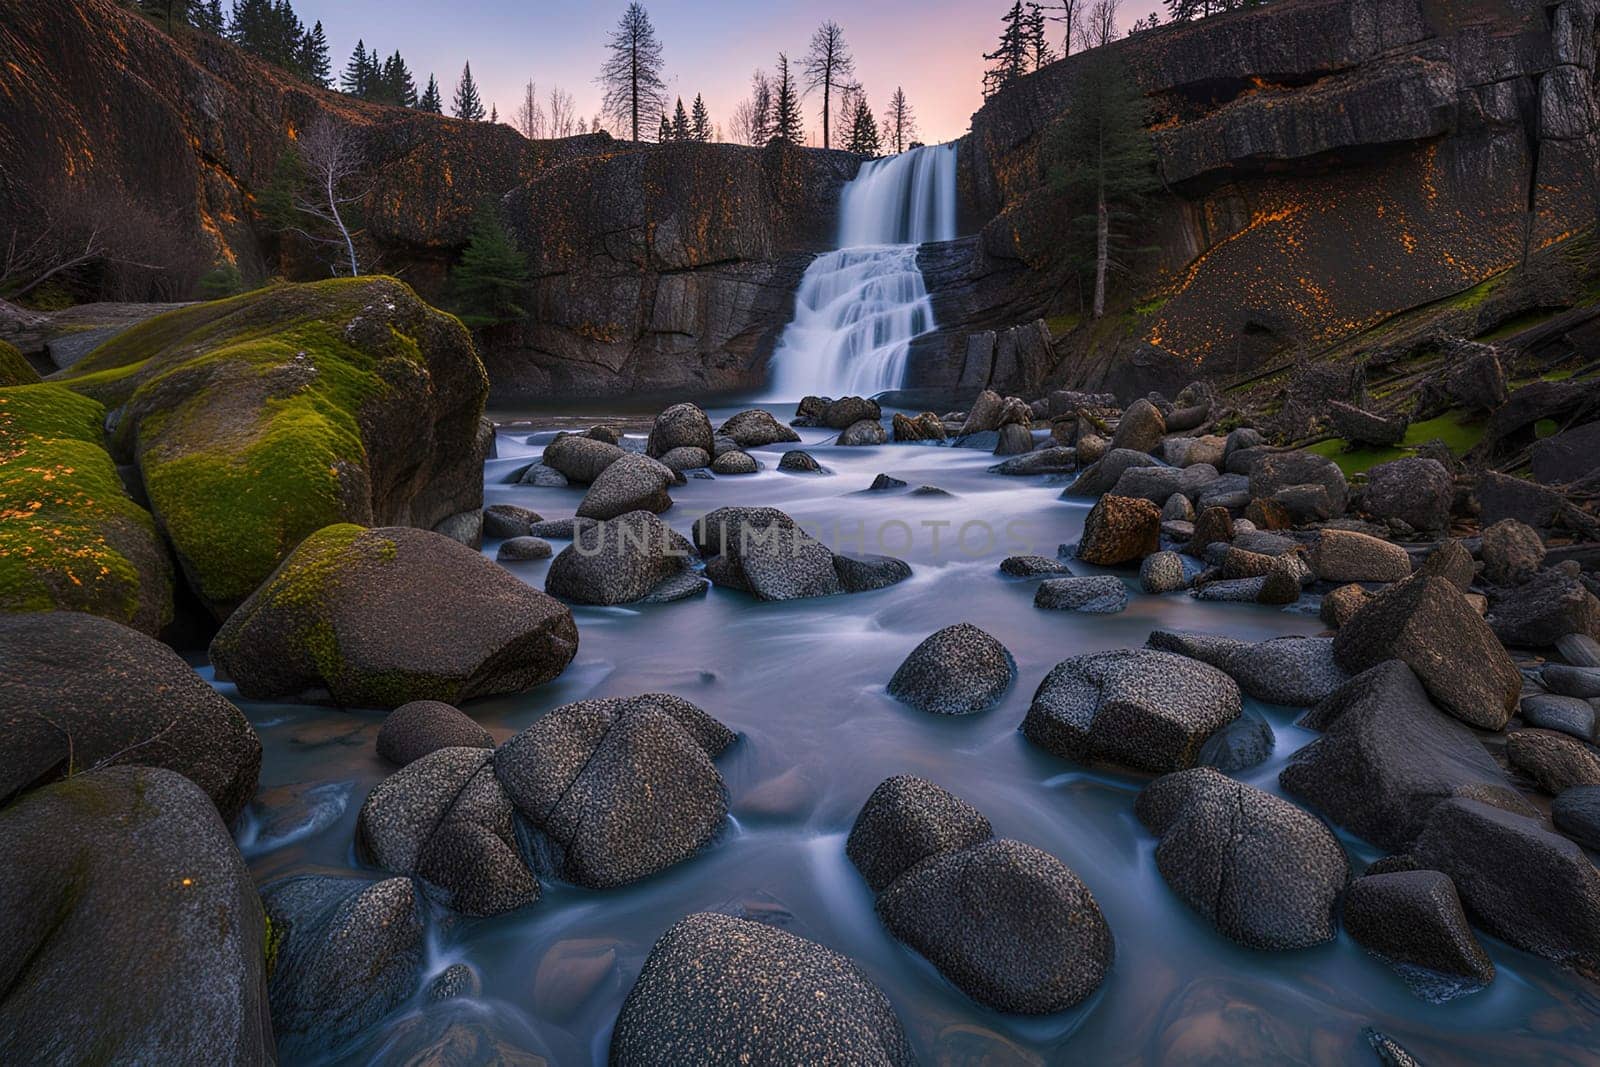 Long exposure of a waterfall in the forest at sunrise by yilmazsavaskandag